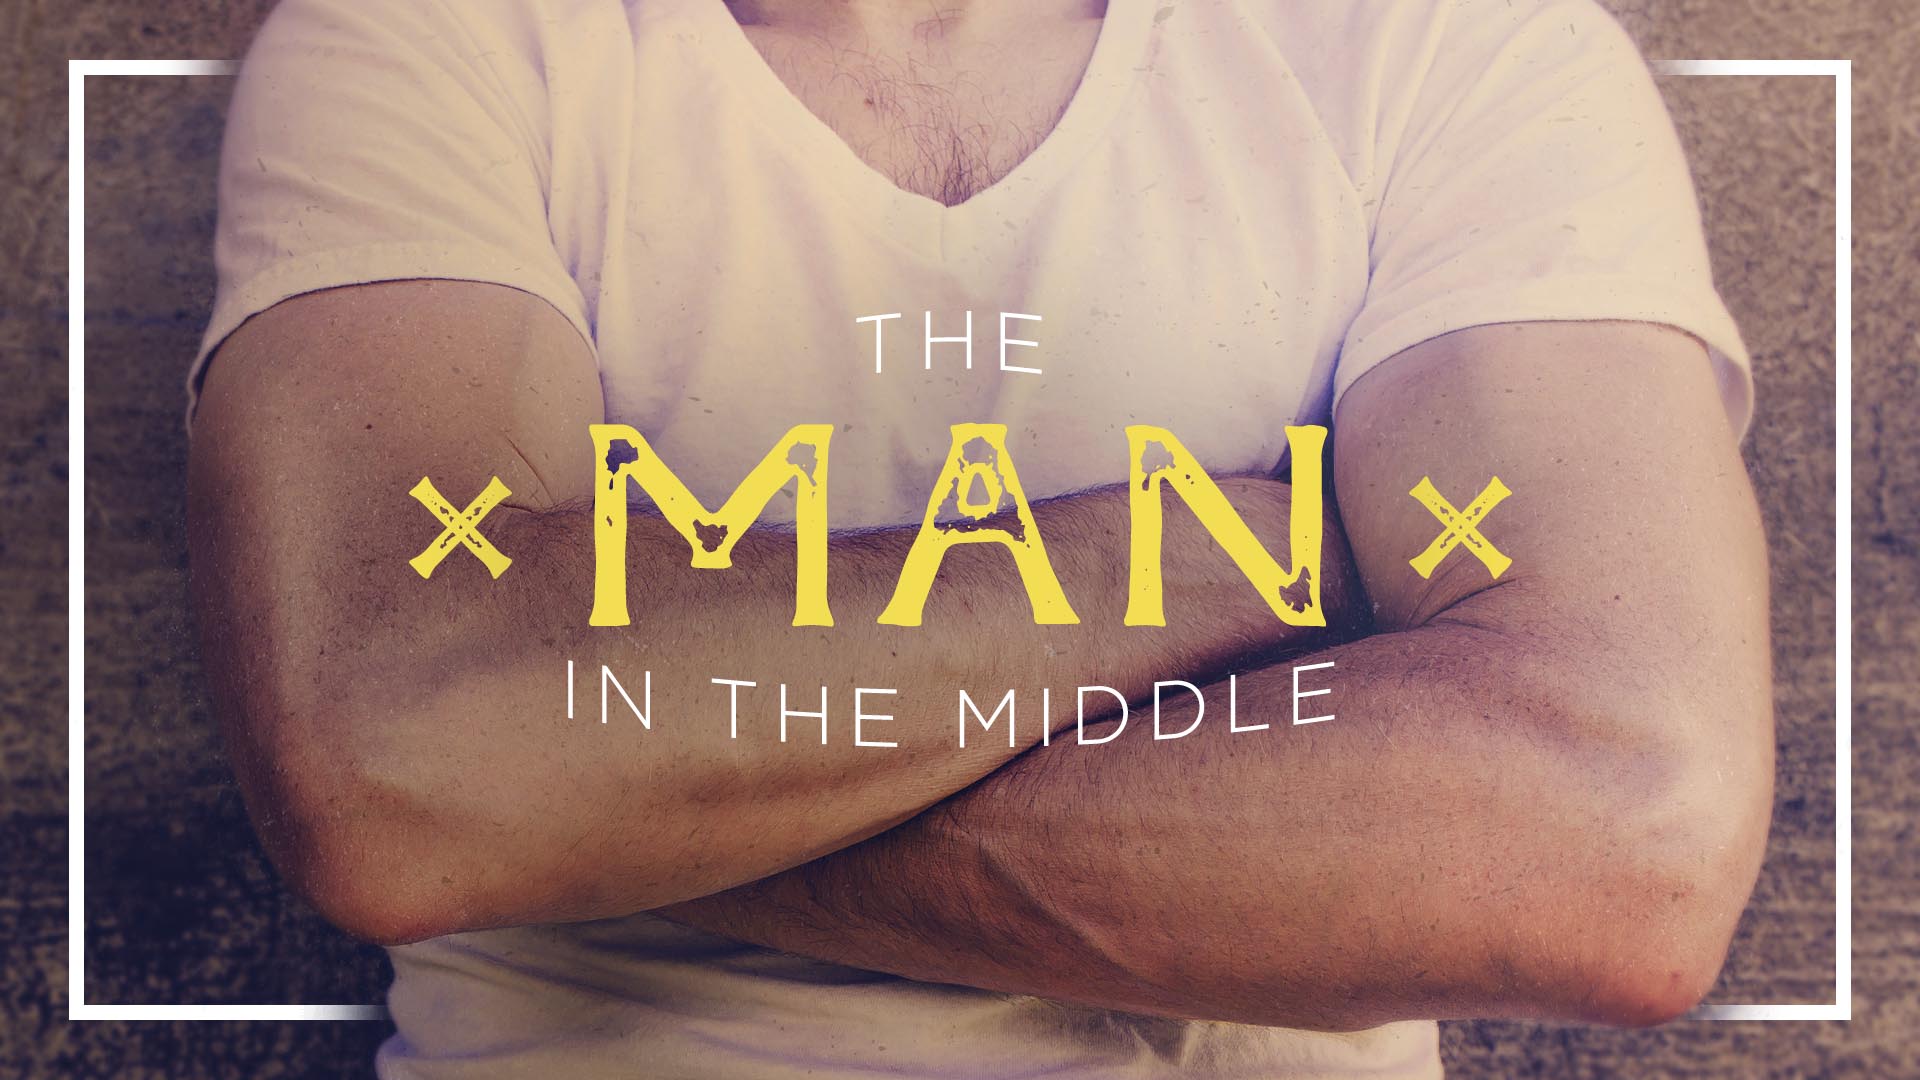 "The Man In The Middle" Message